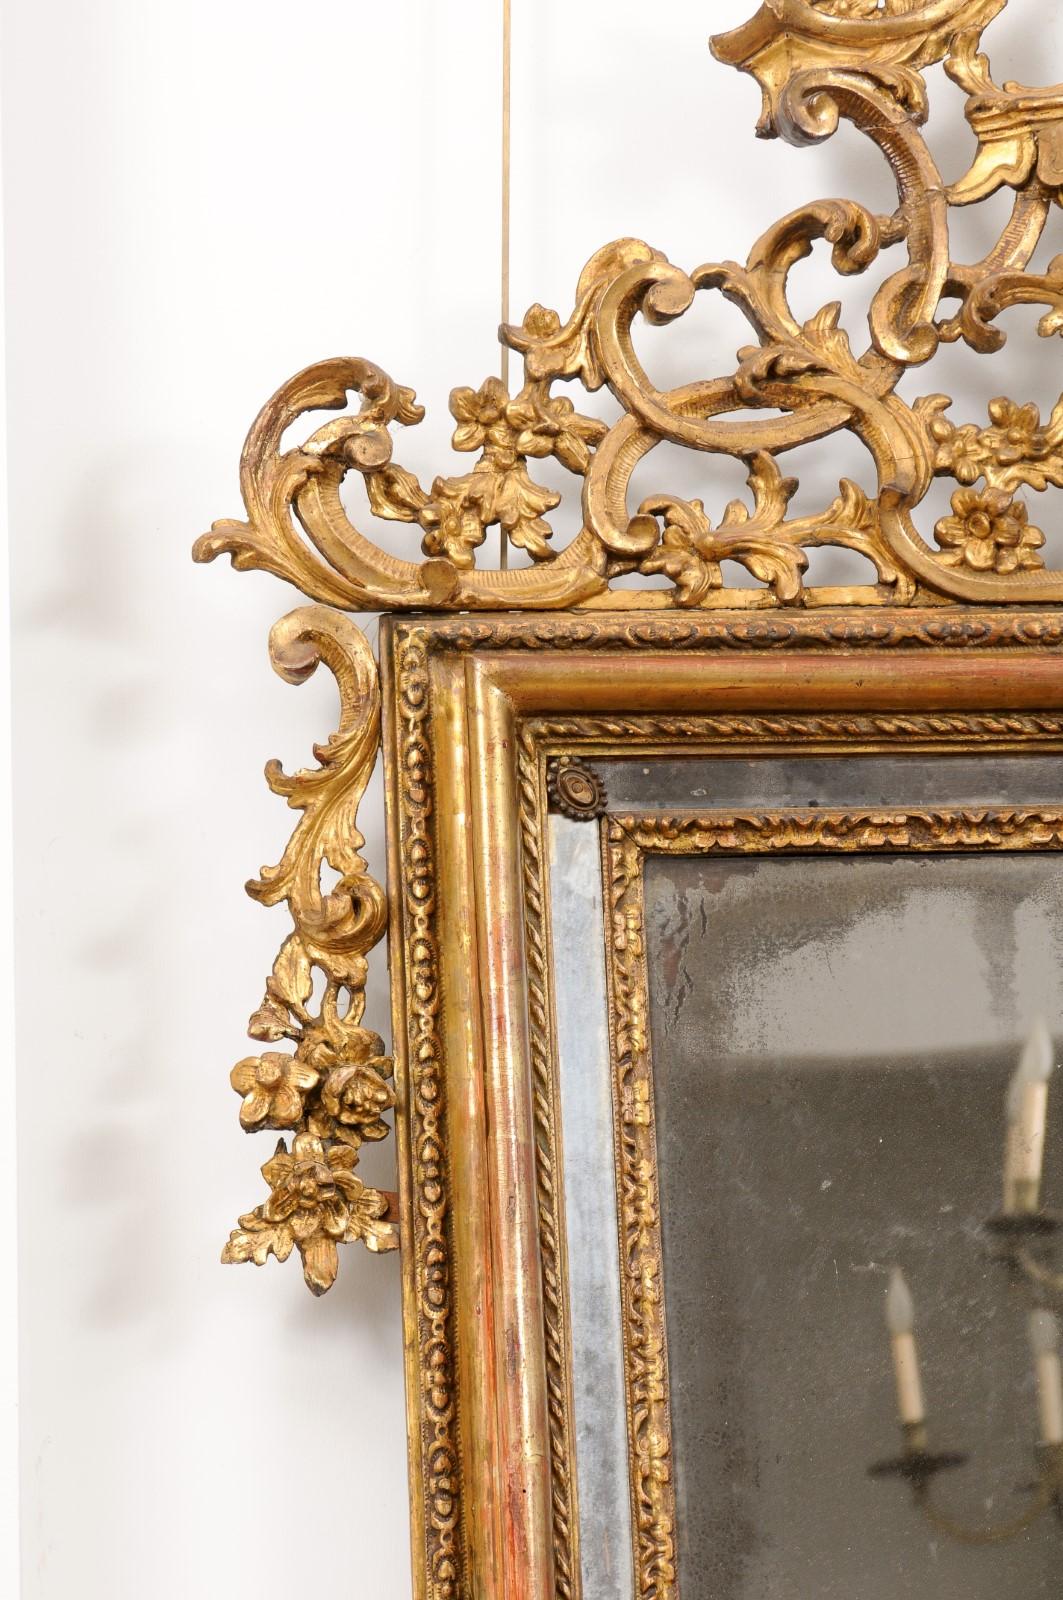 Large 18th Century Italian Rococo Giltwood Mirror with Pagoda Top For Sale 3